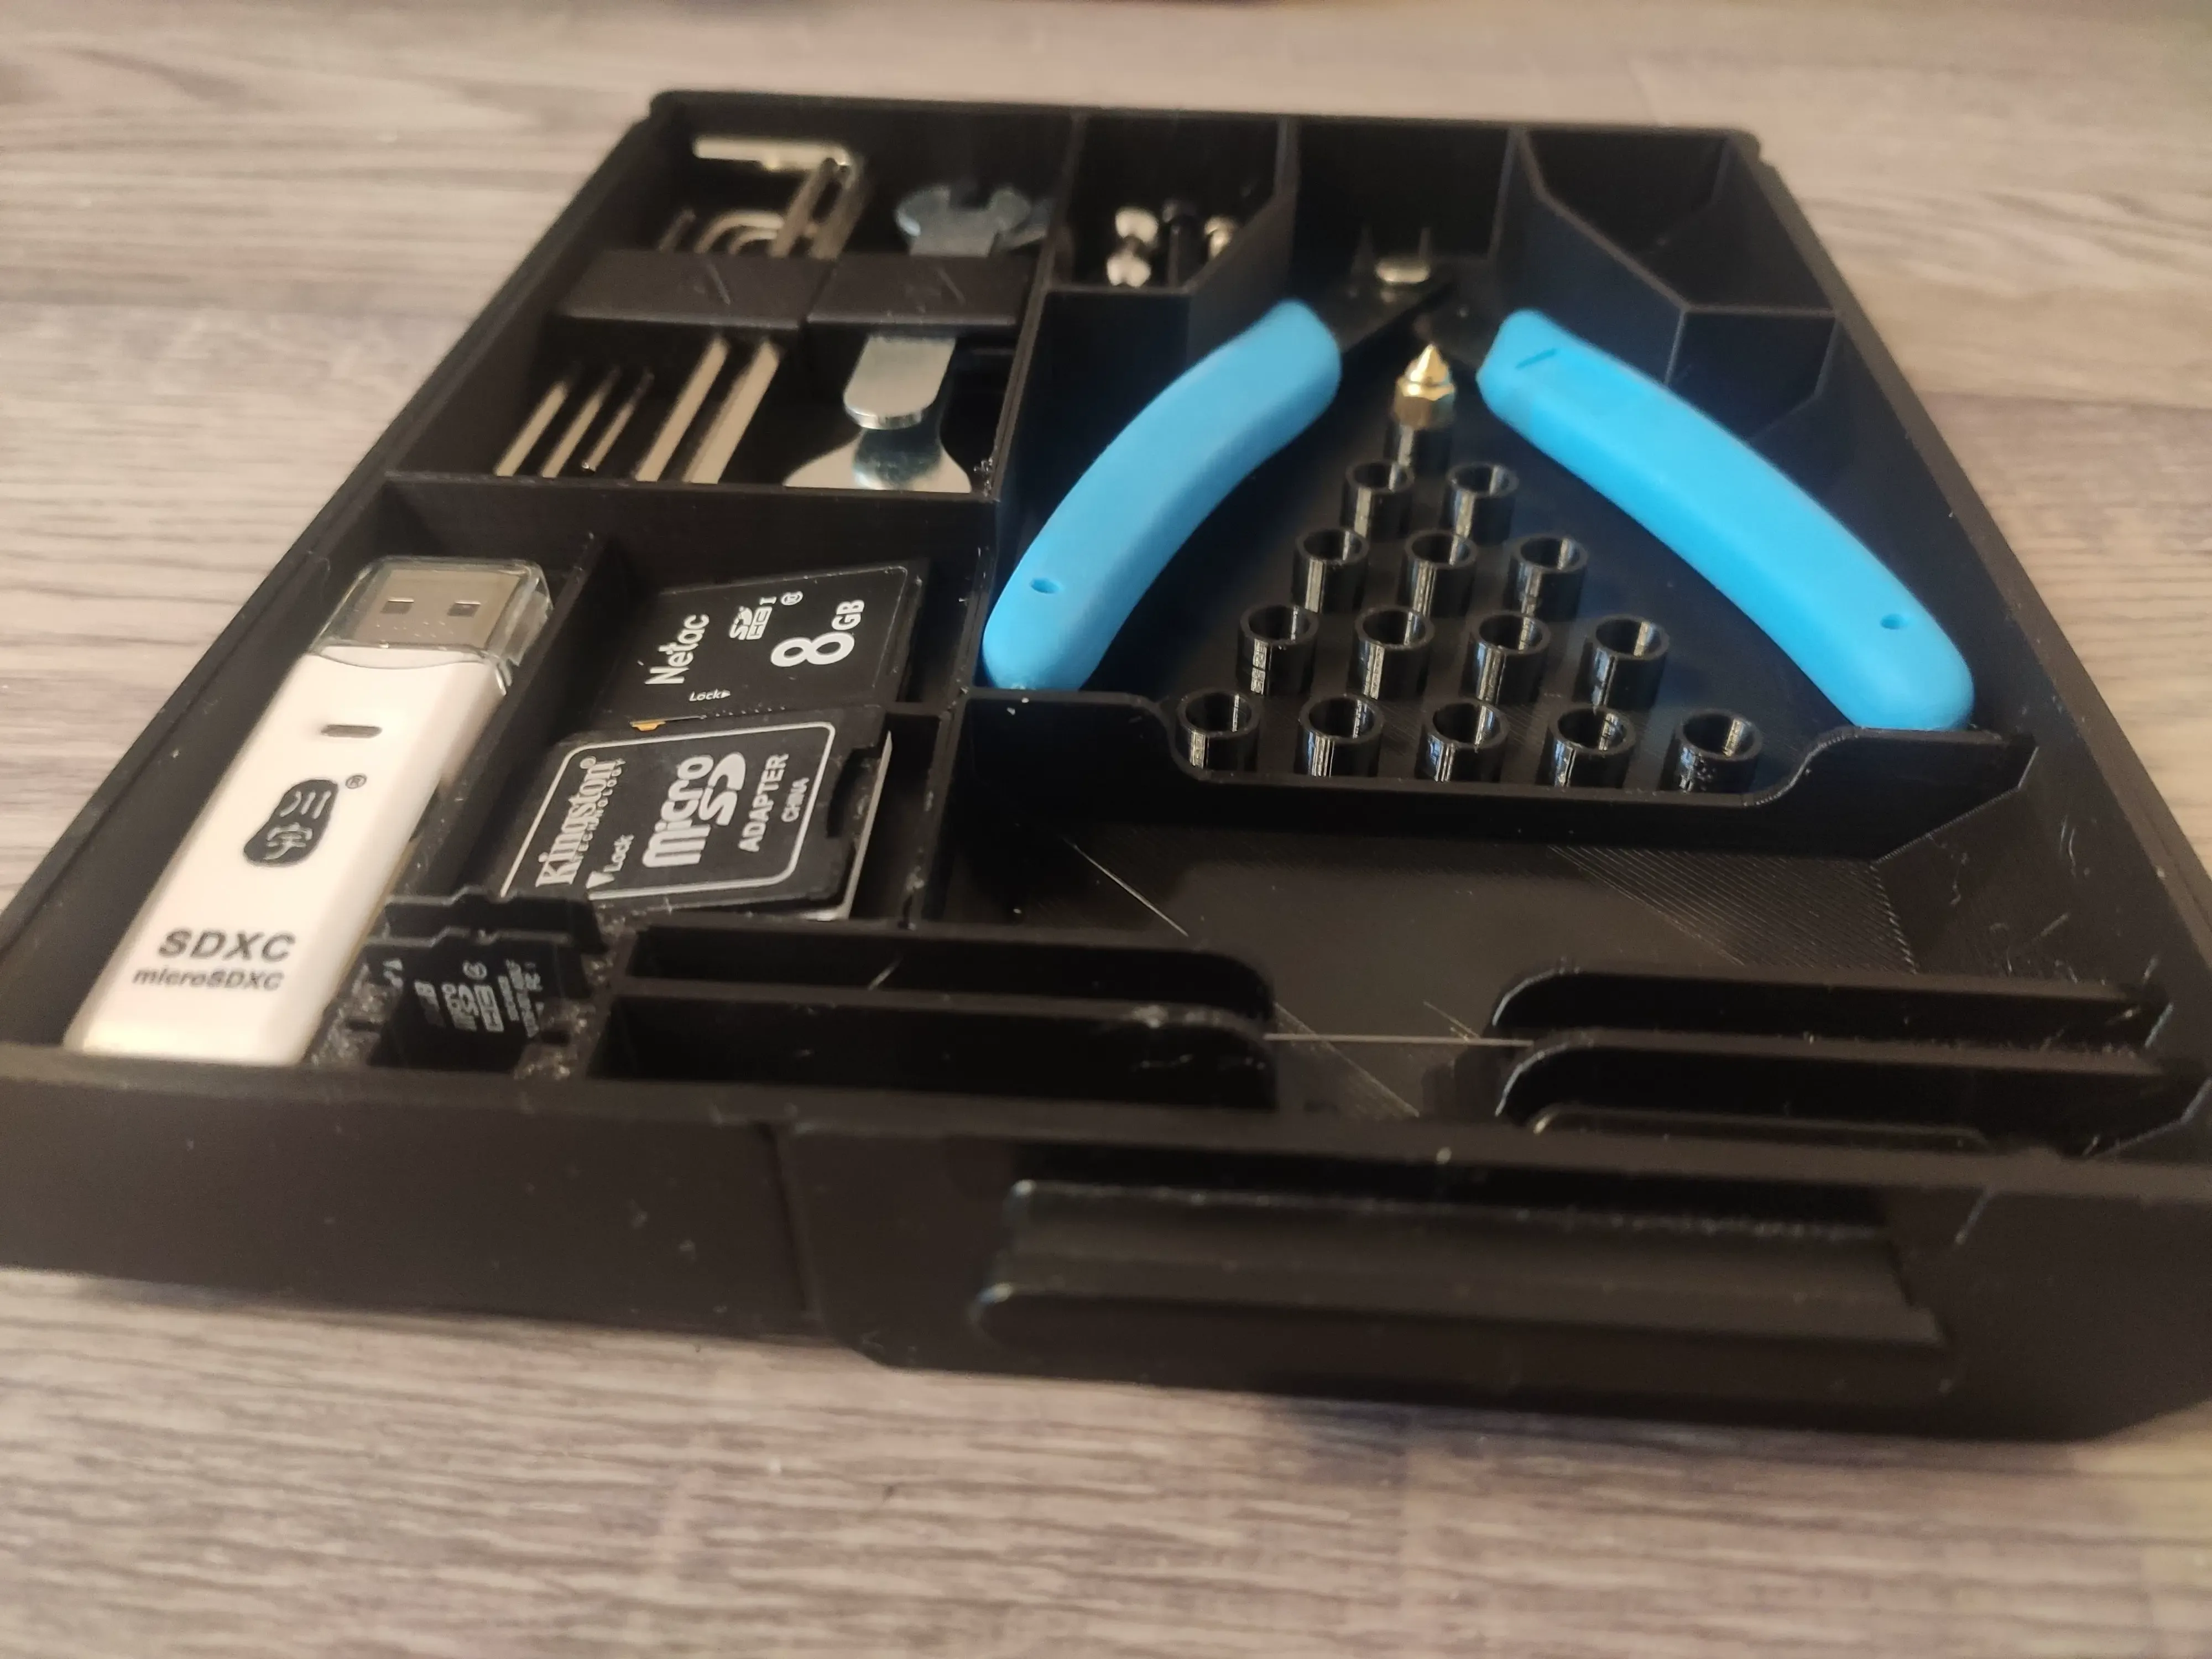 Ender 3 S1 Pro tray insert with keyholders